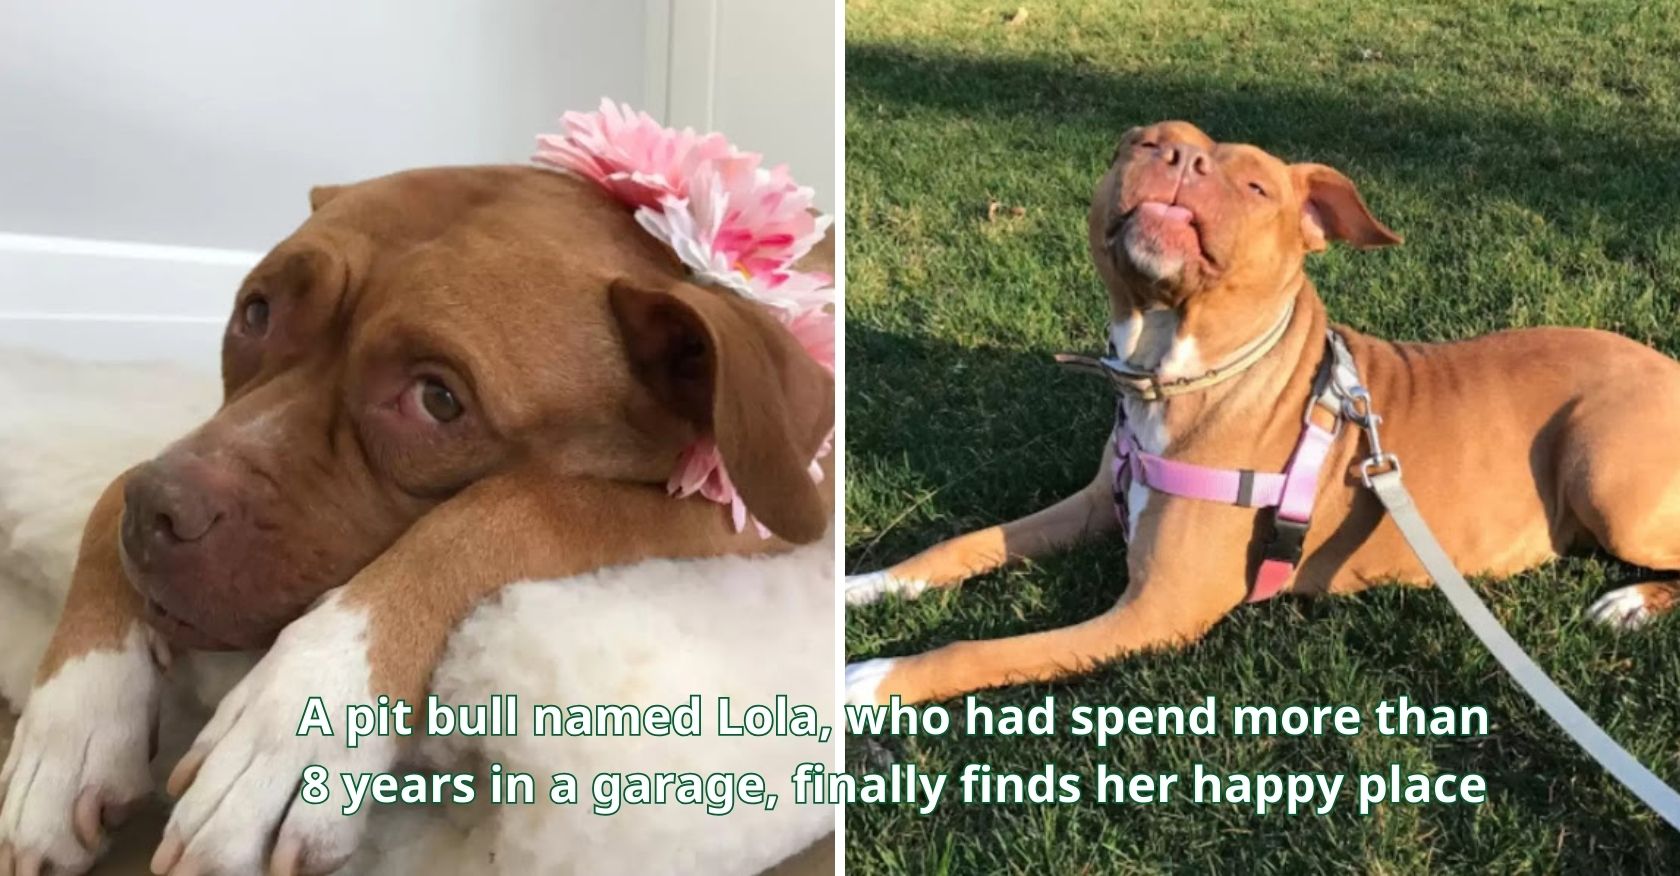 A pit bull named Lola, who had spend more than 8 years in a garage, finally finds her happy place